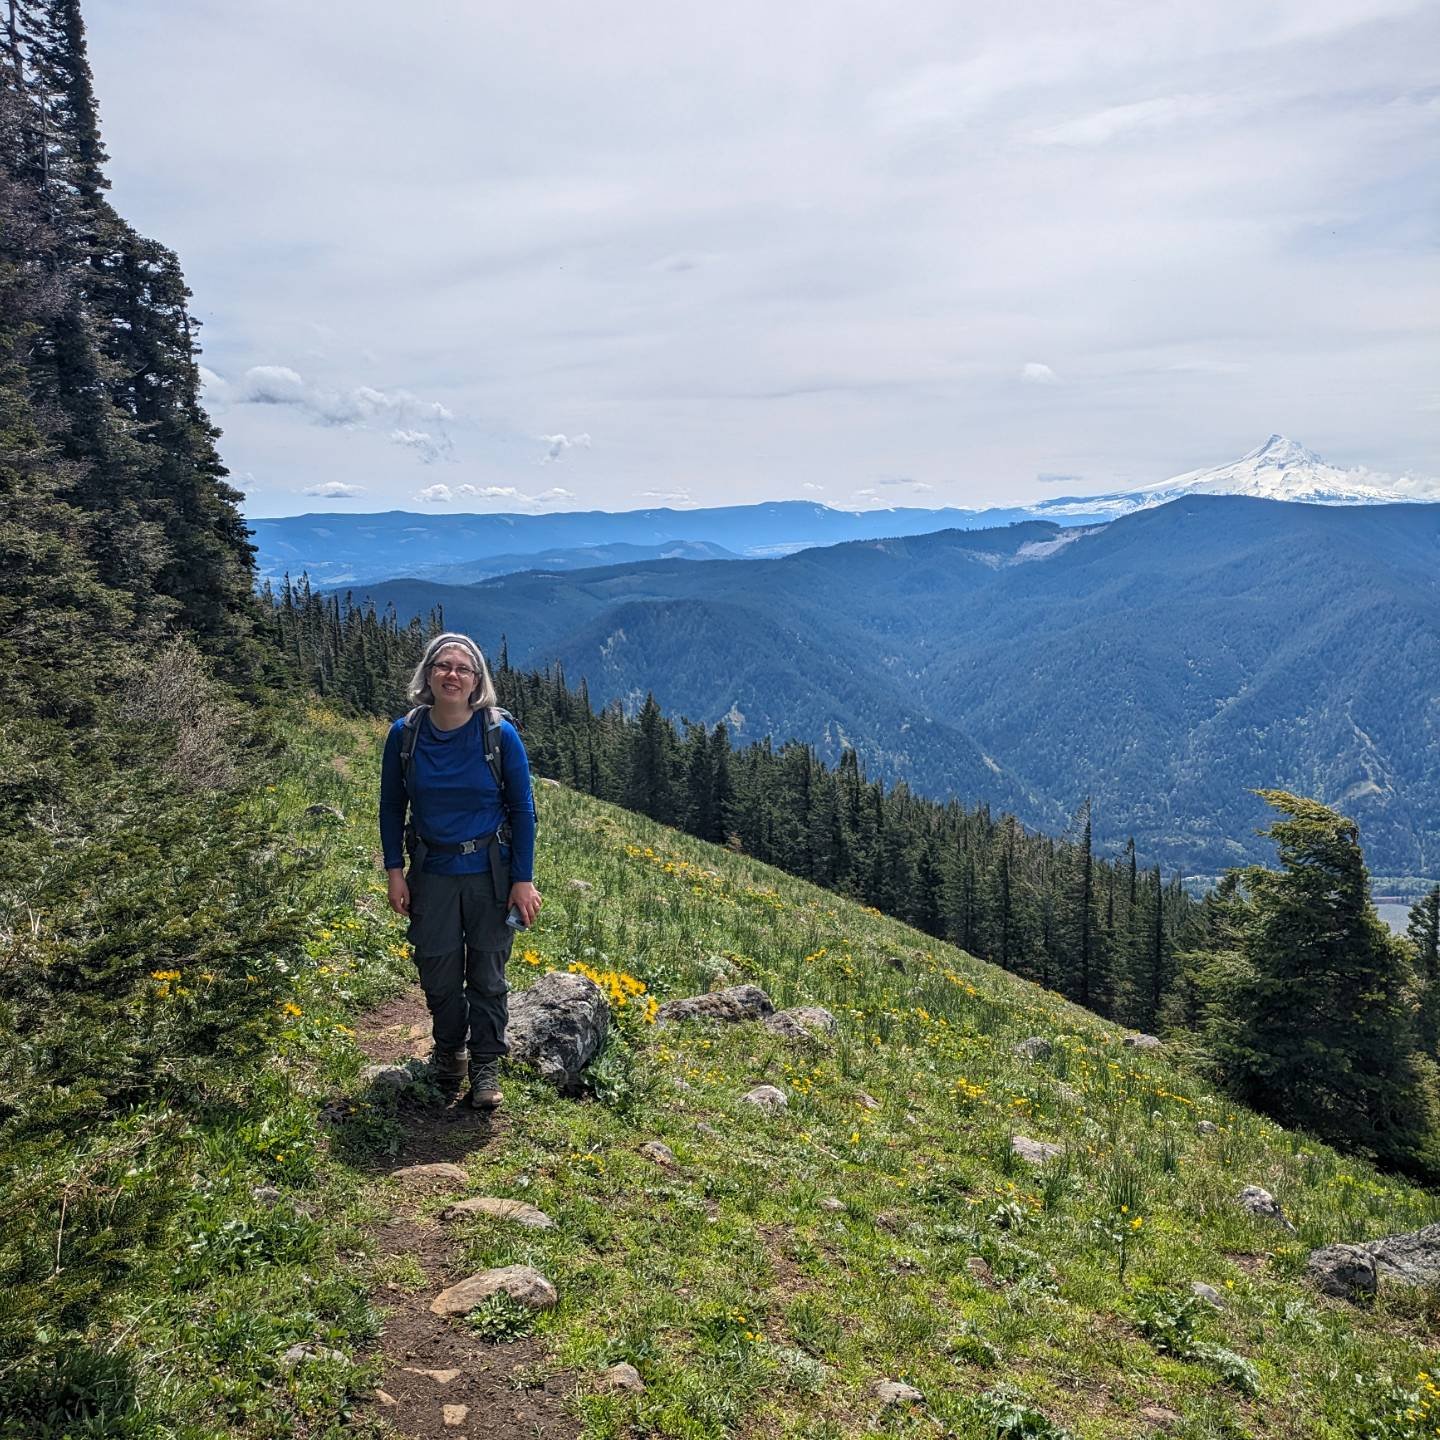 We had a wonderful time exploring this corner of the Gorge today! The trail was steep but we were cooking it uphill, and the sun stayed out almost the entire day. The flowers aren't close to peak yet but they were fabulous just the same. Best of all: